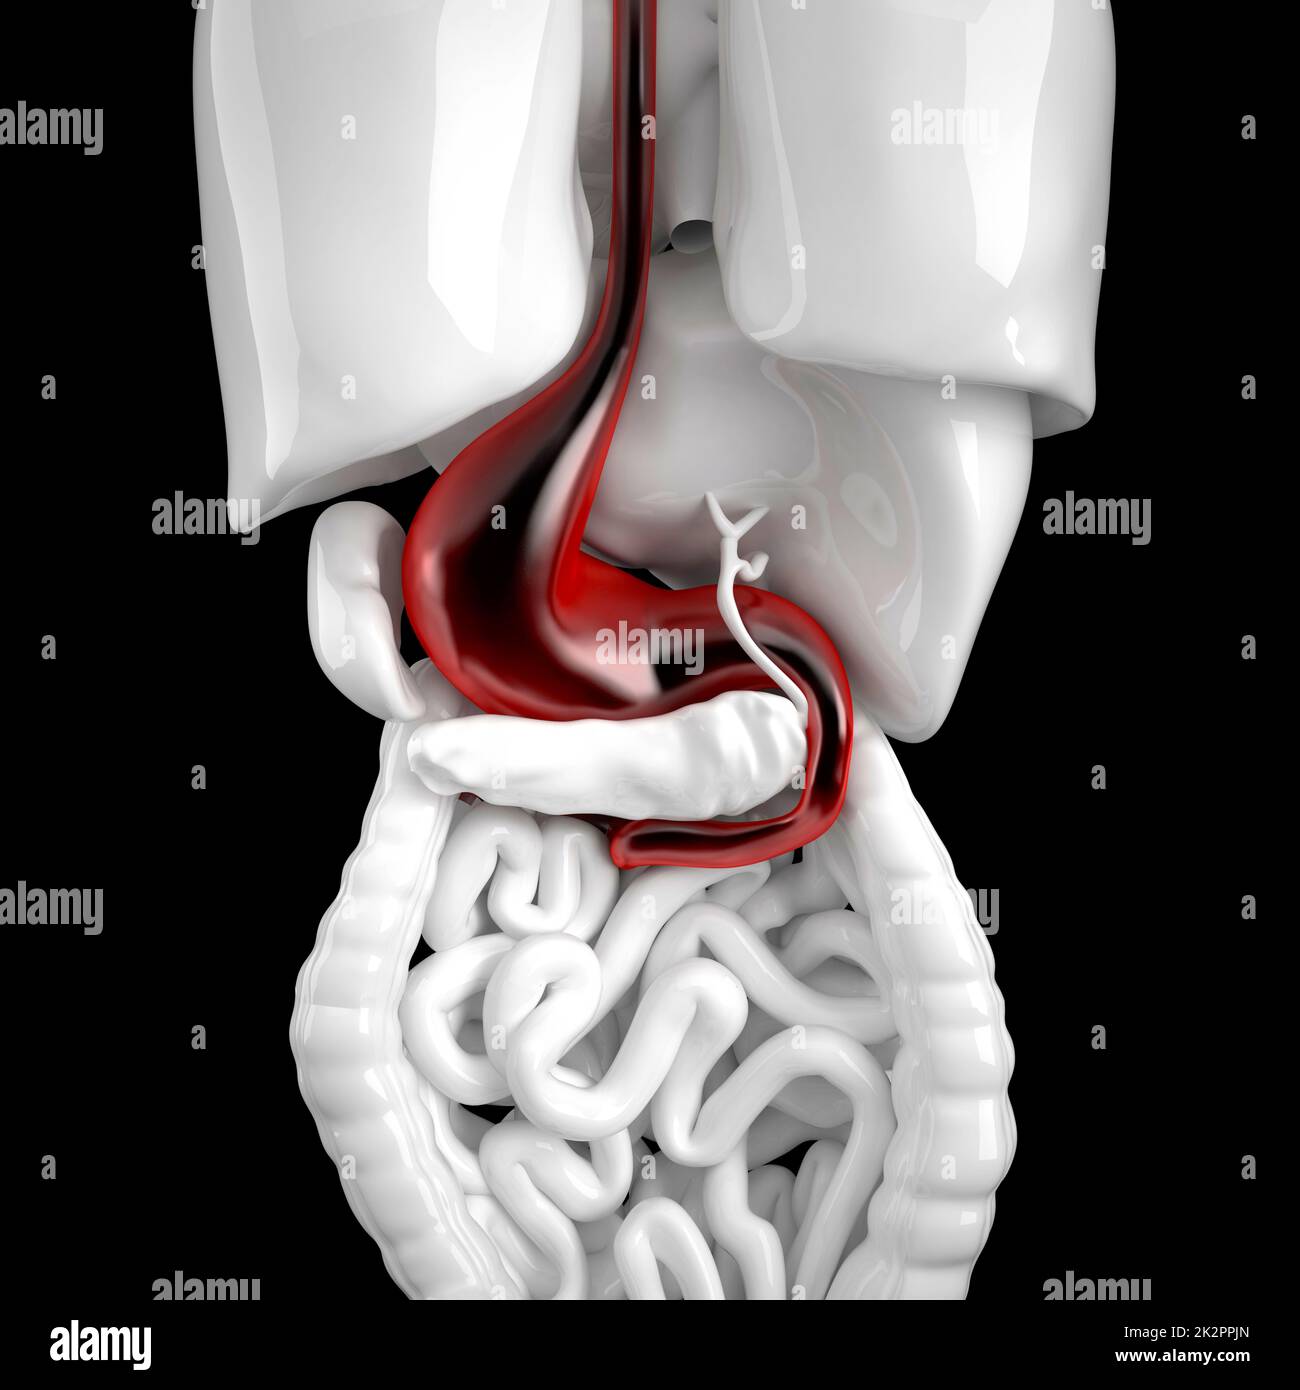 Human stomach. 3d anatomical illustration. Contains clipping path Stock Photo